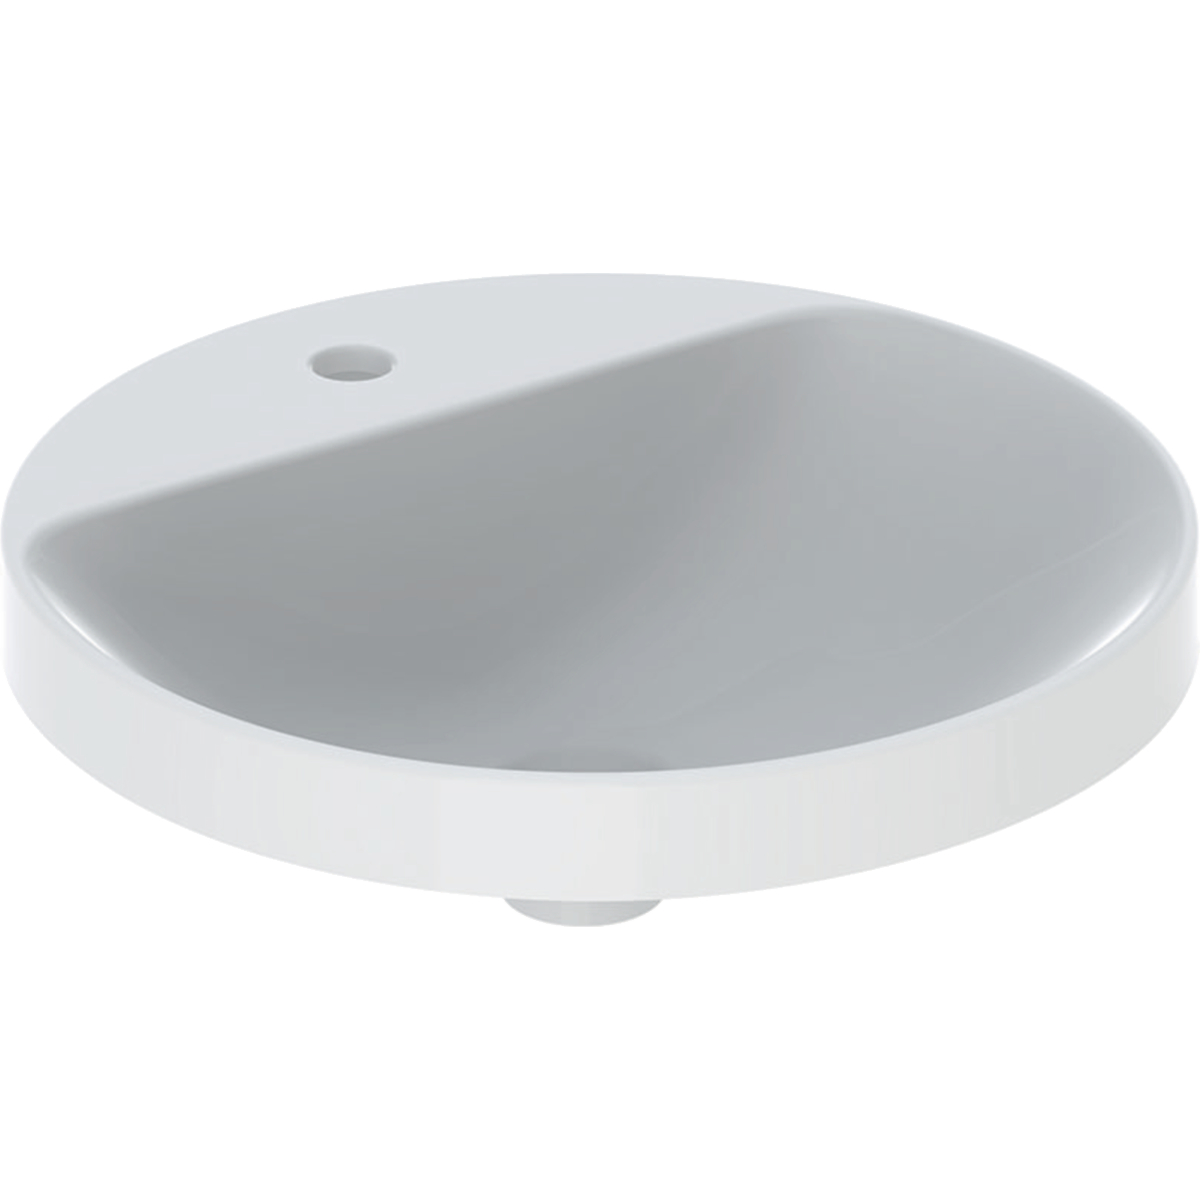 VariForm round 48cm countertop 1th basin without overflow